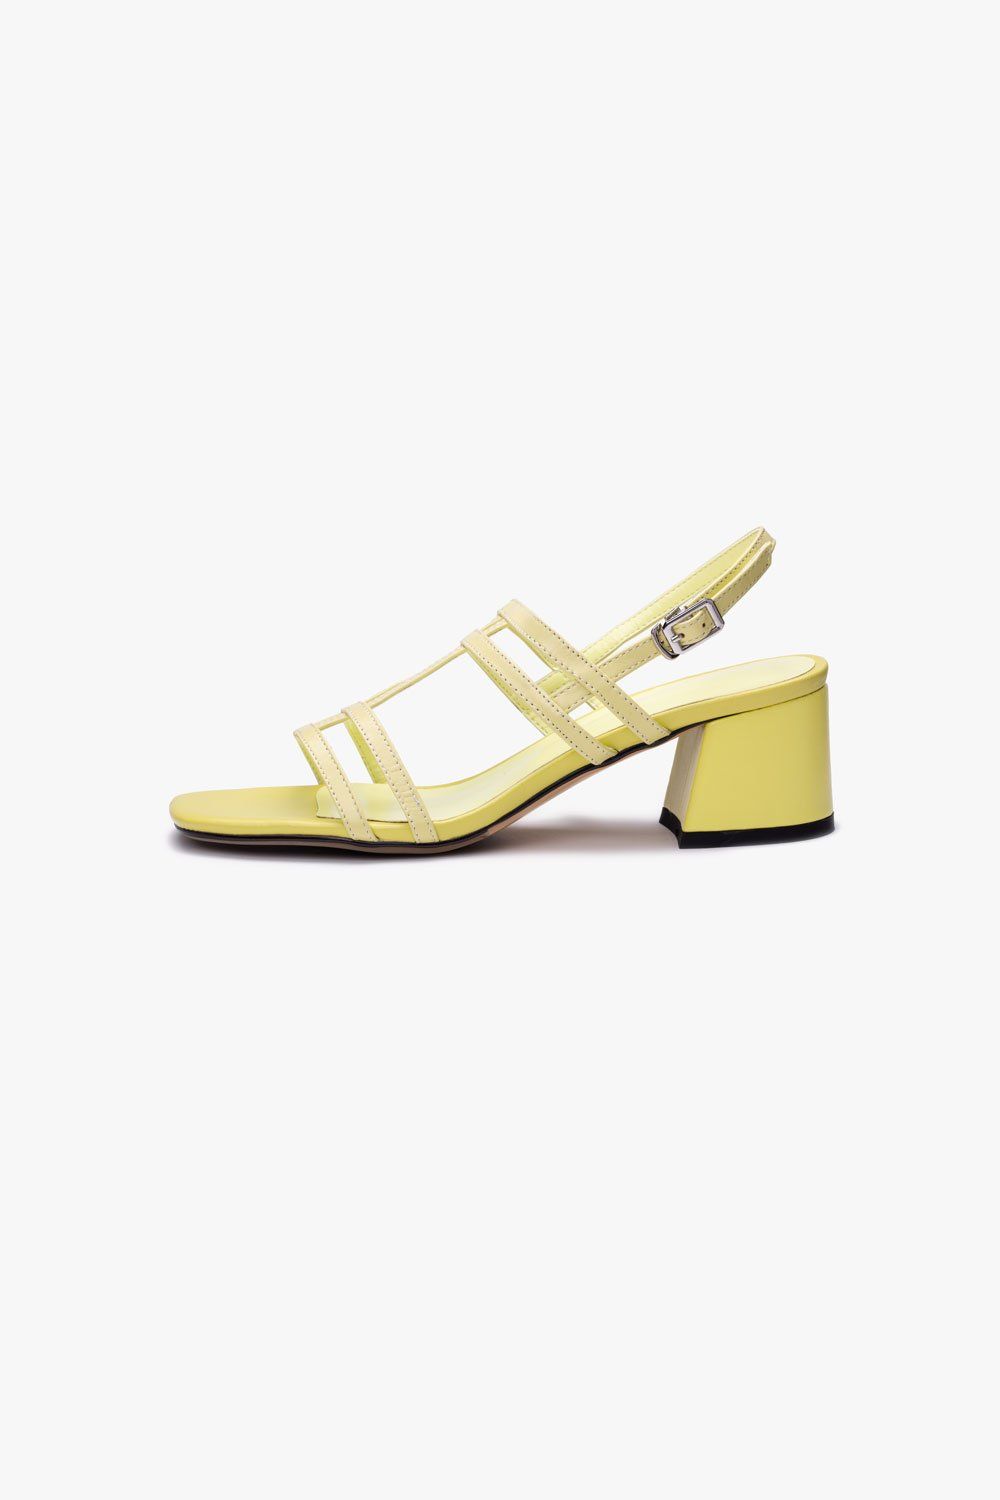 square toe sandals might be our favorite ’90s-inspired trend yet